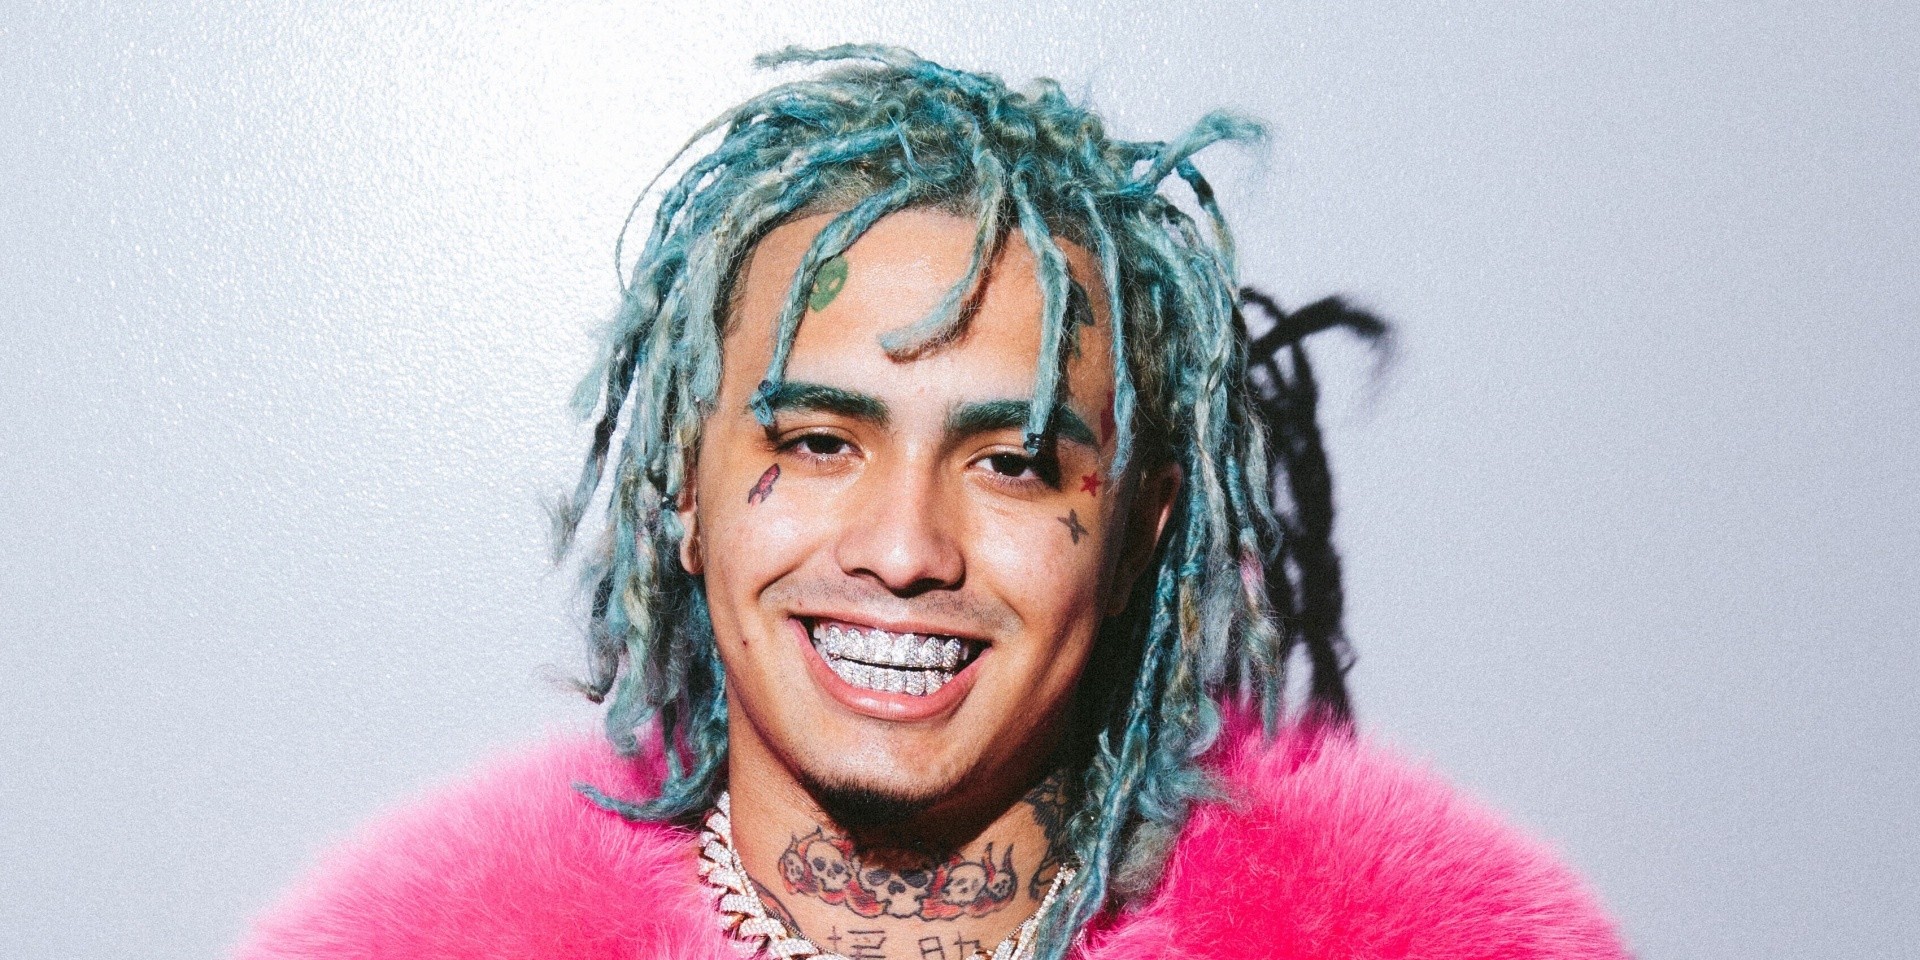 Lil Pump removes anti-Asian lyrics in new track 'Butterly Doors' 